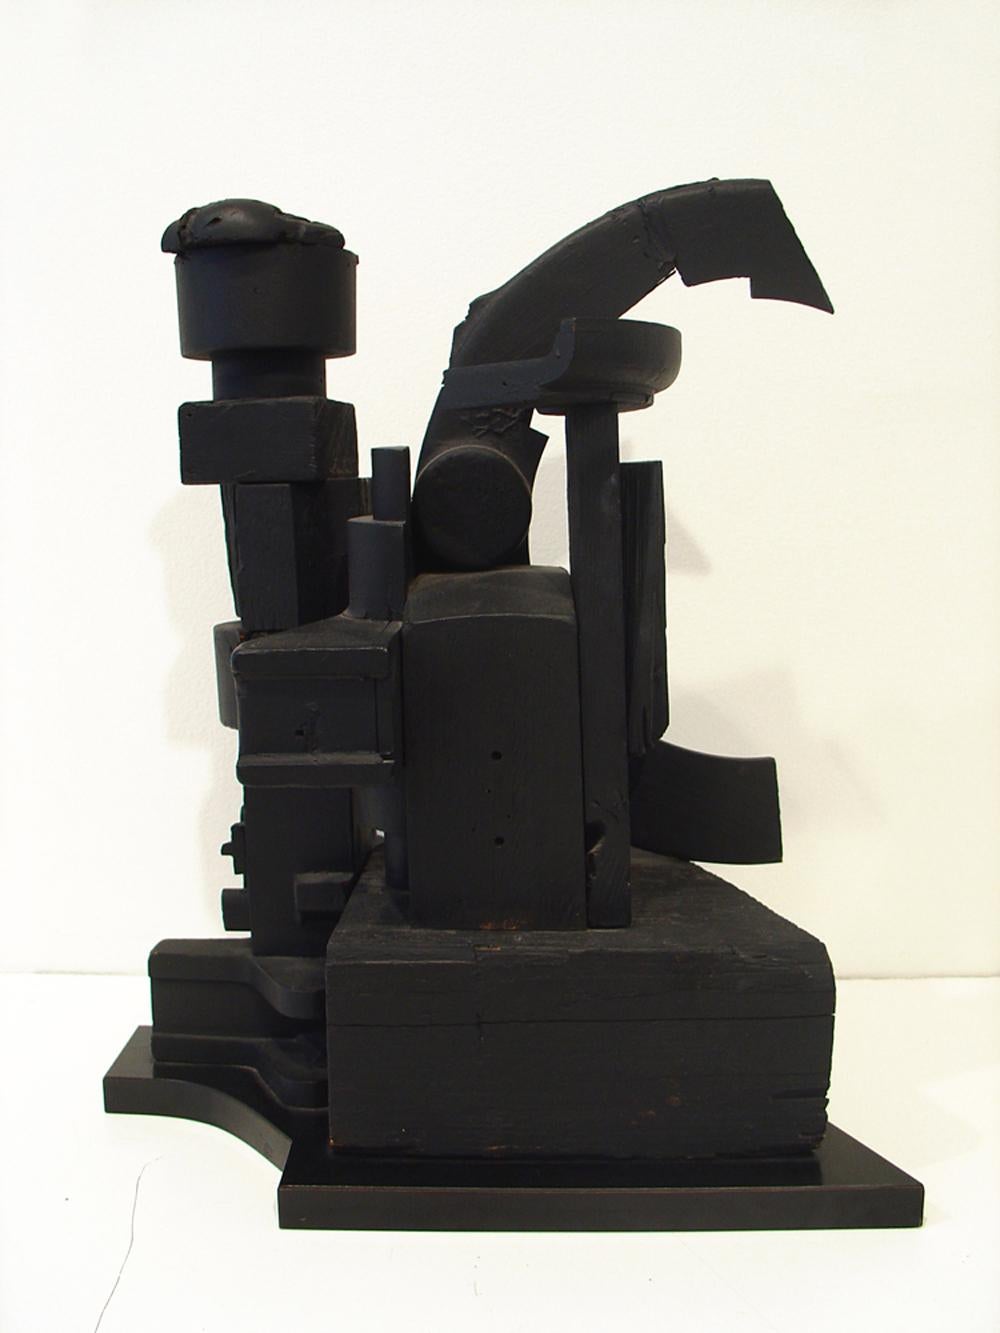 MAQUETTE FOR MONUMENTAL SCULPTURE VII - Sculpture by Louise Nevelson